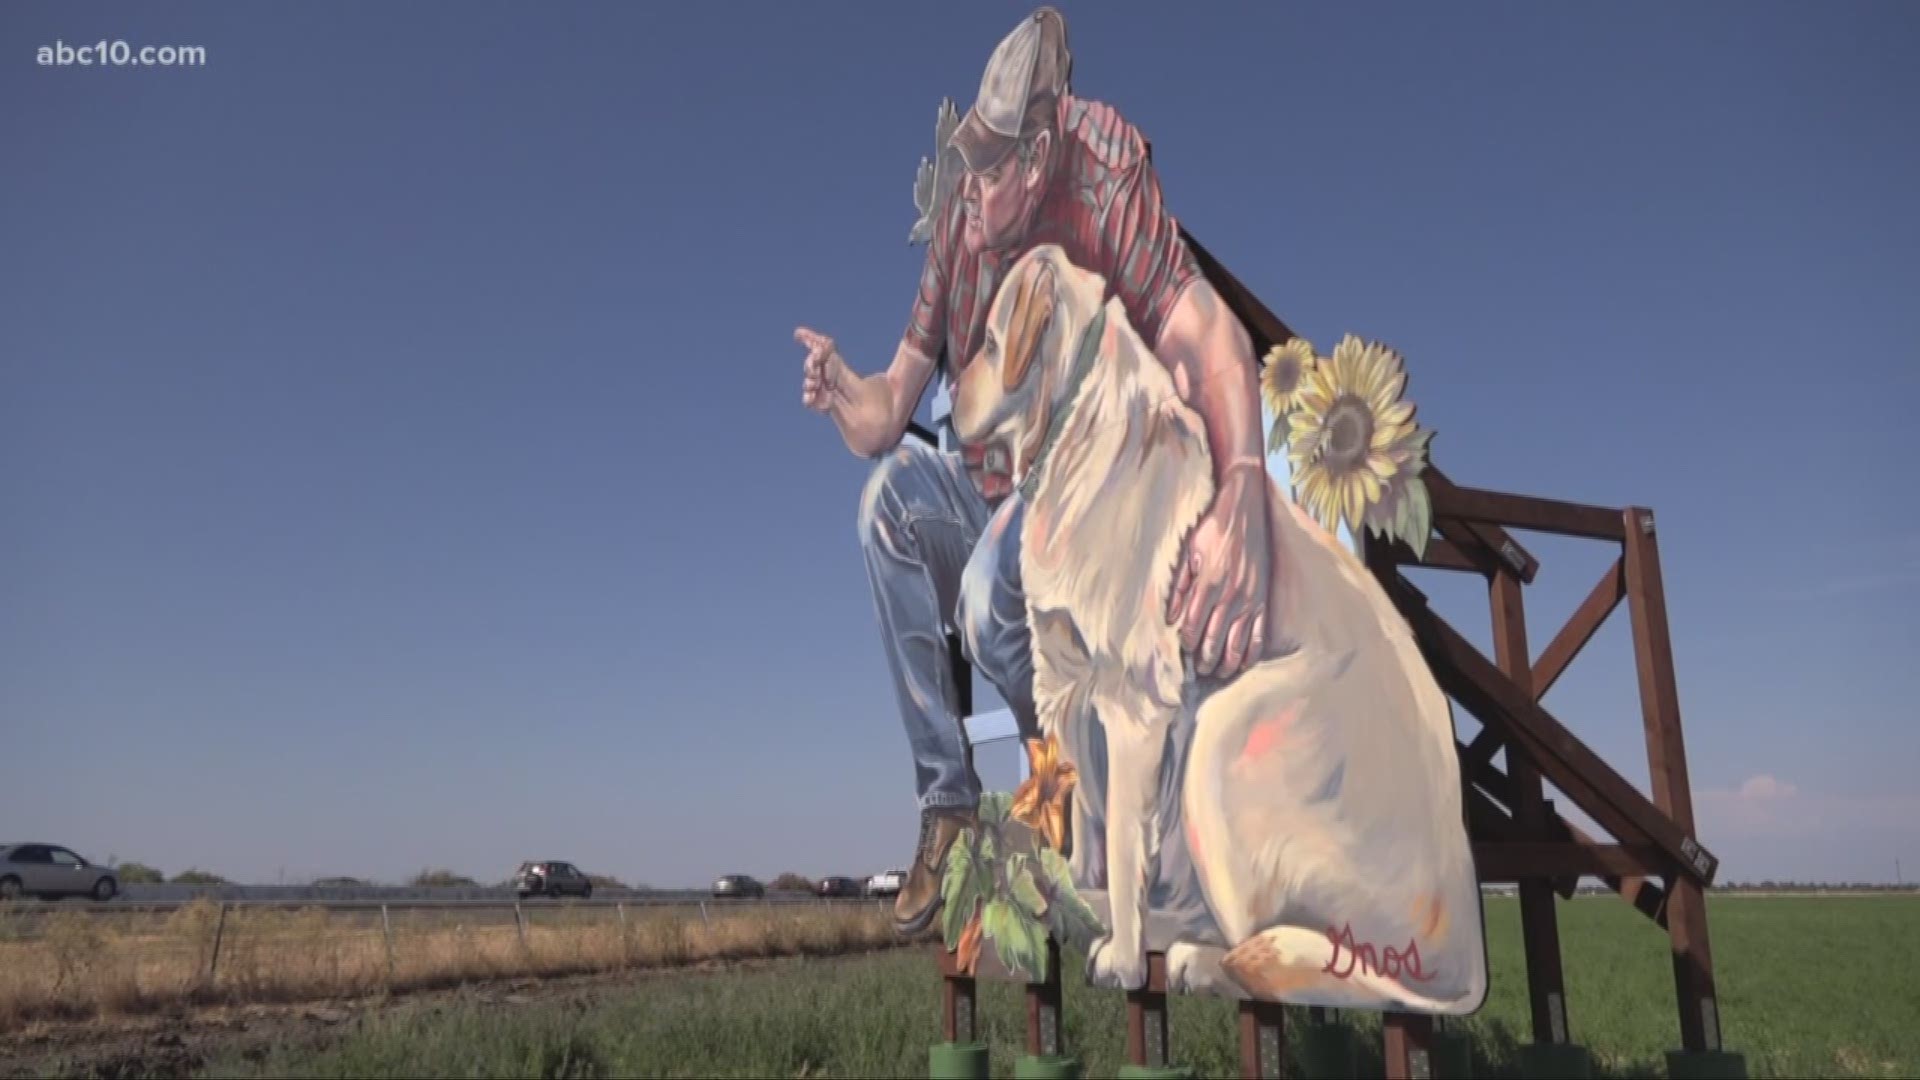 The 20 foot by 20 foot mural of a Solano County farmer and his dog can be seen from hundreds of feet away.